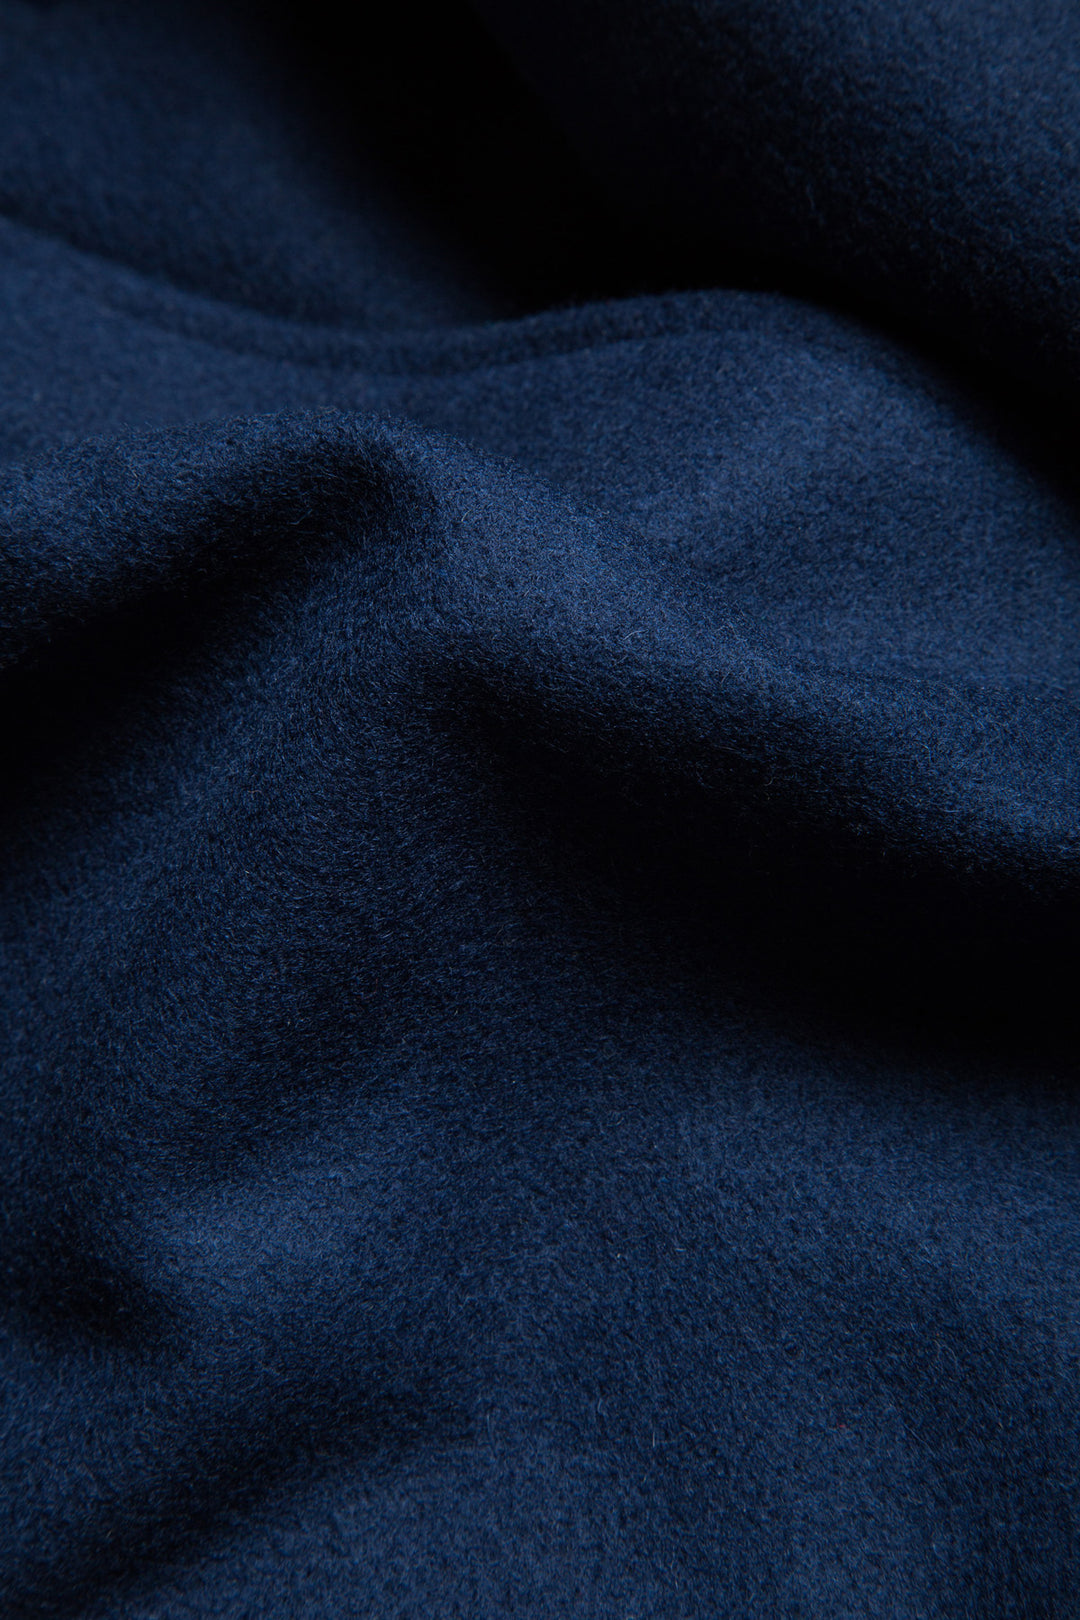 UNINTERRUPTED X GOLDEN BEAR ALL STAR VARSITY JACKET BLUE (4458685235280) - close up of the wool fabric